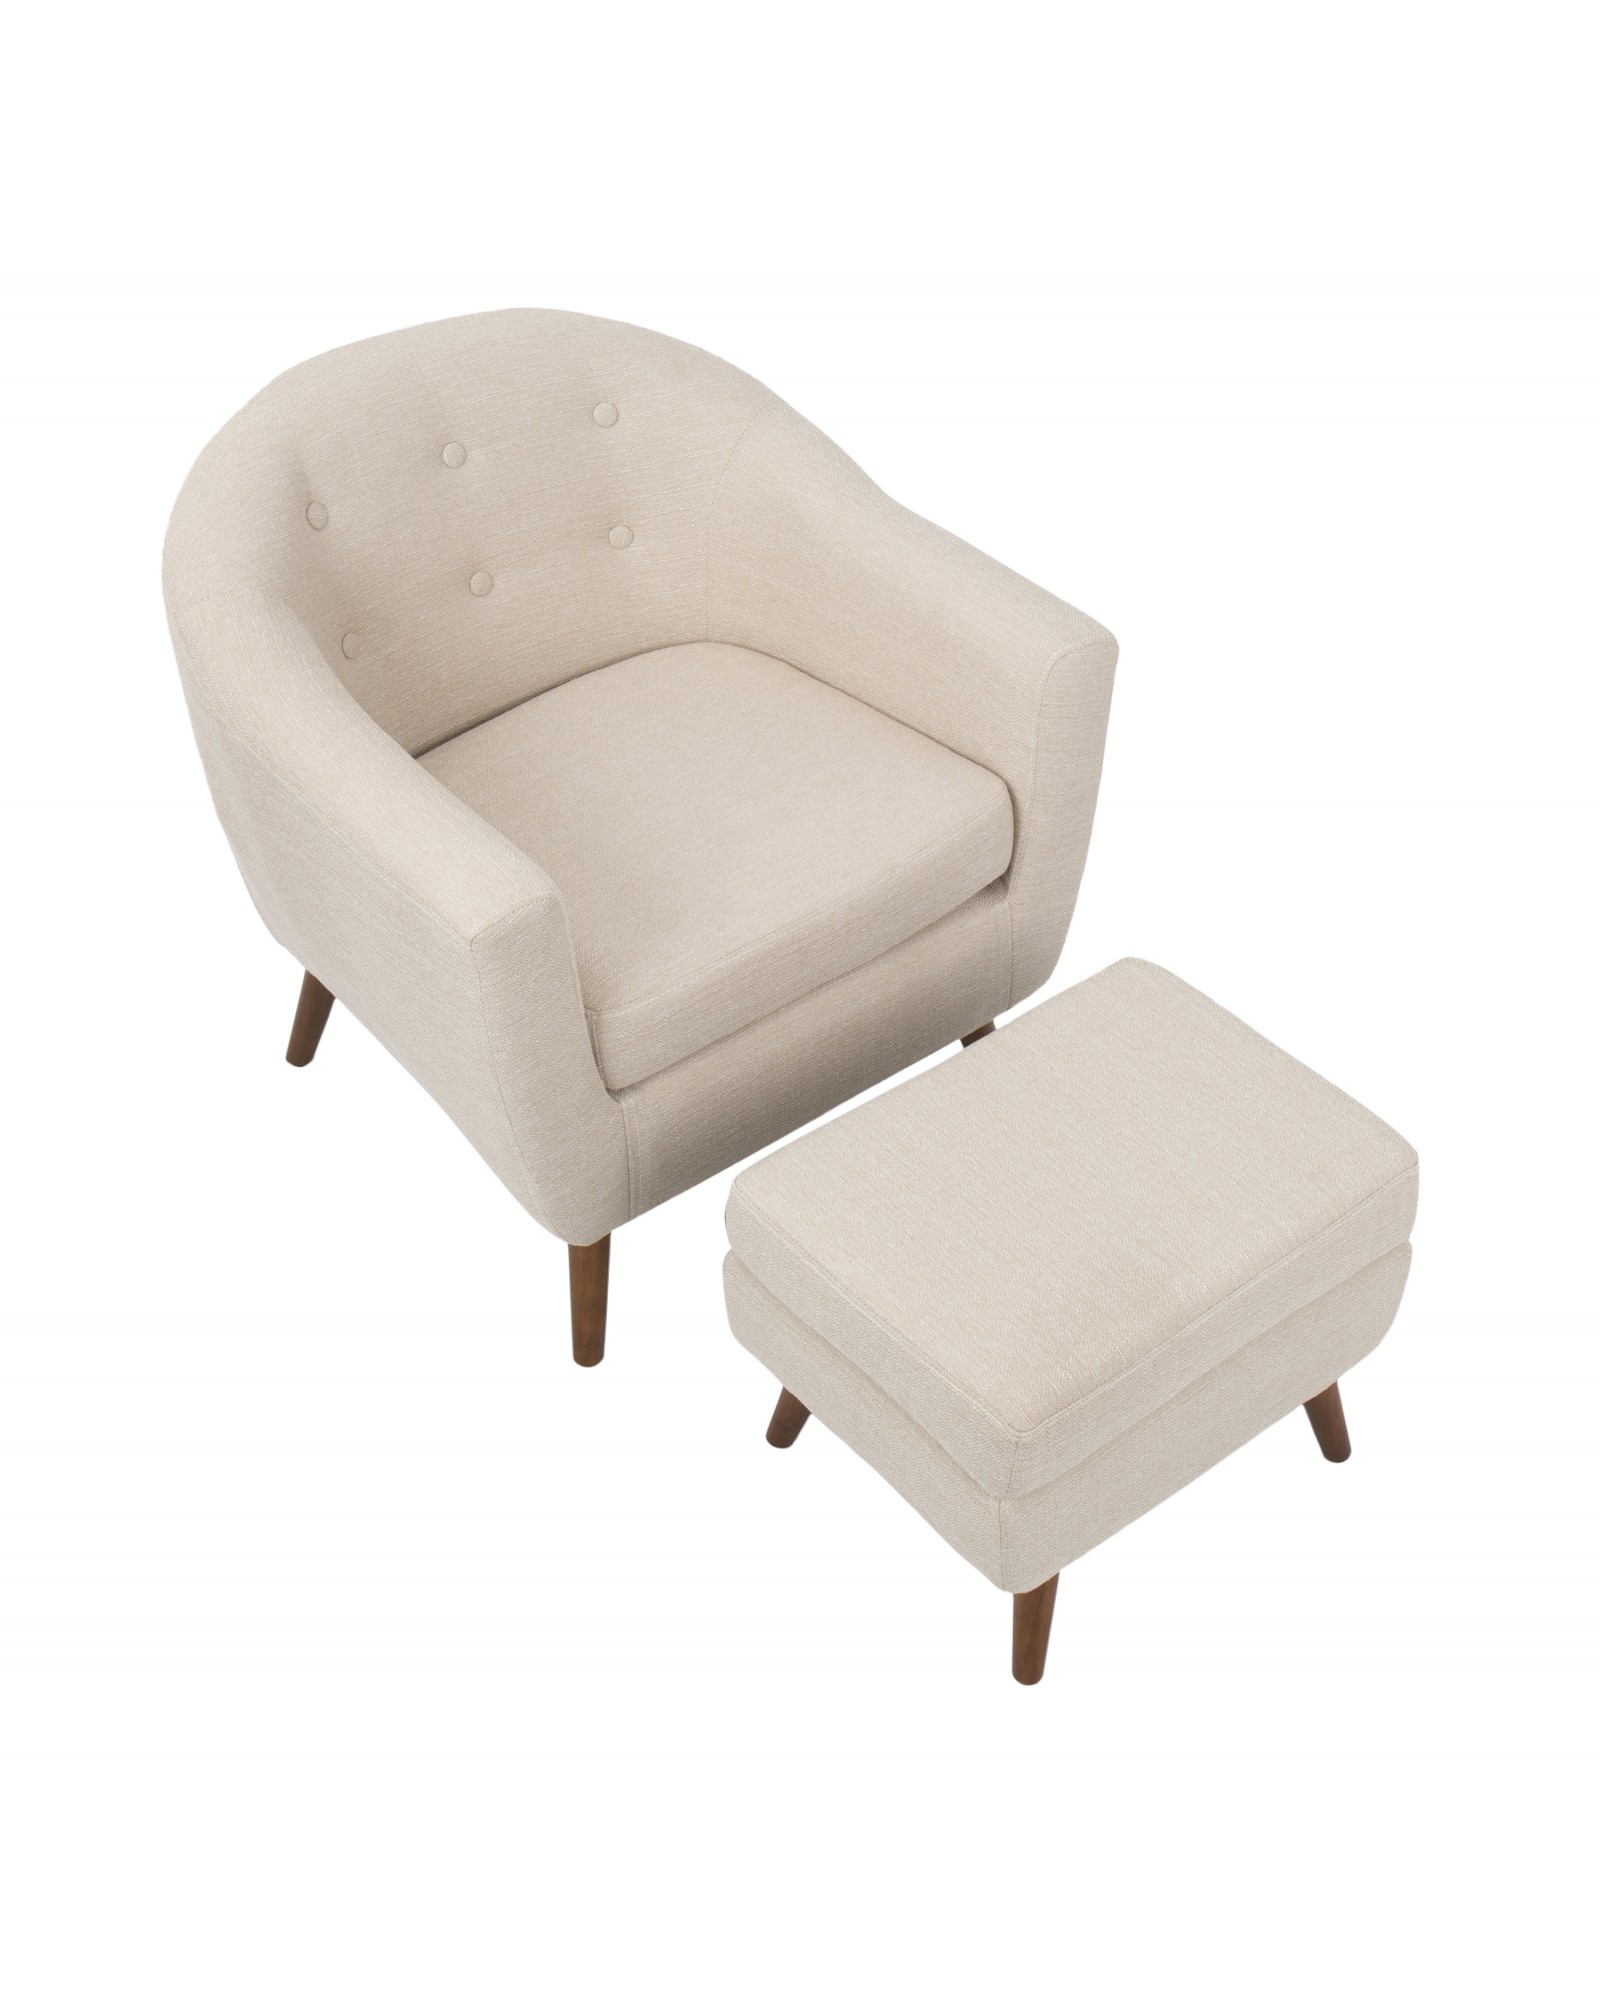 Rockwell Mid-Century Modern Accent Chair and Ottoman in Beige